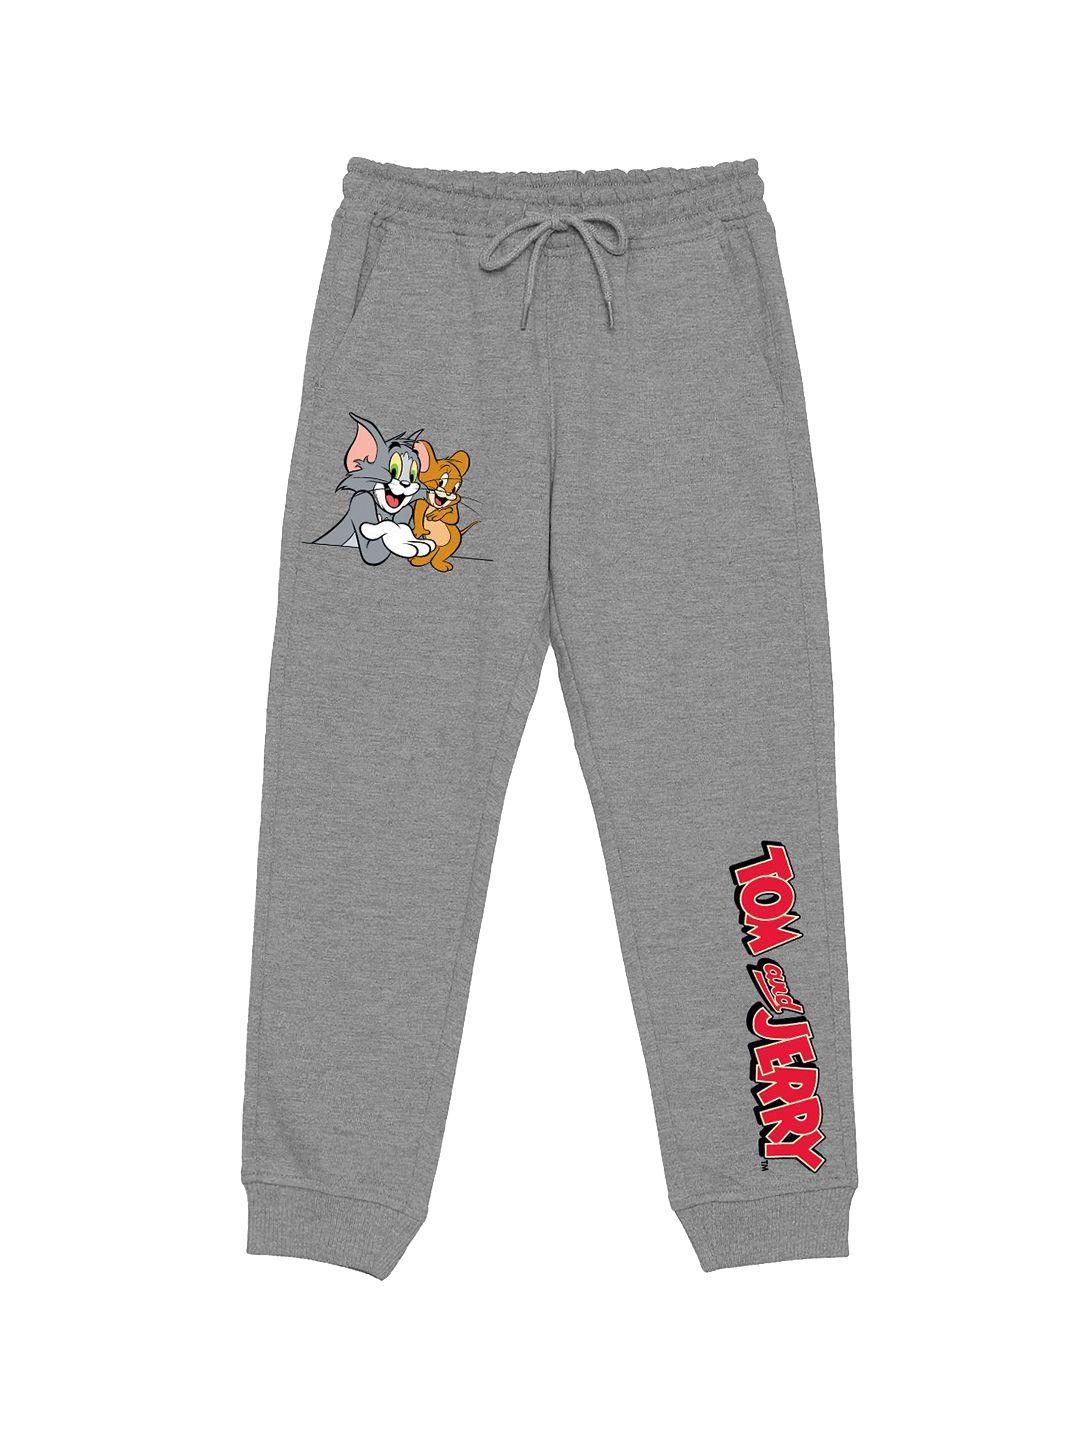 warner bros by wear your mind kids tom & jerry printed mid rise joggers